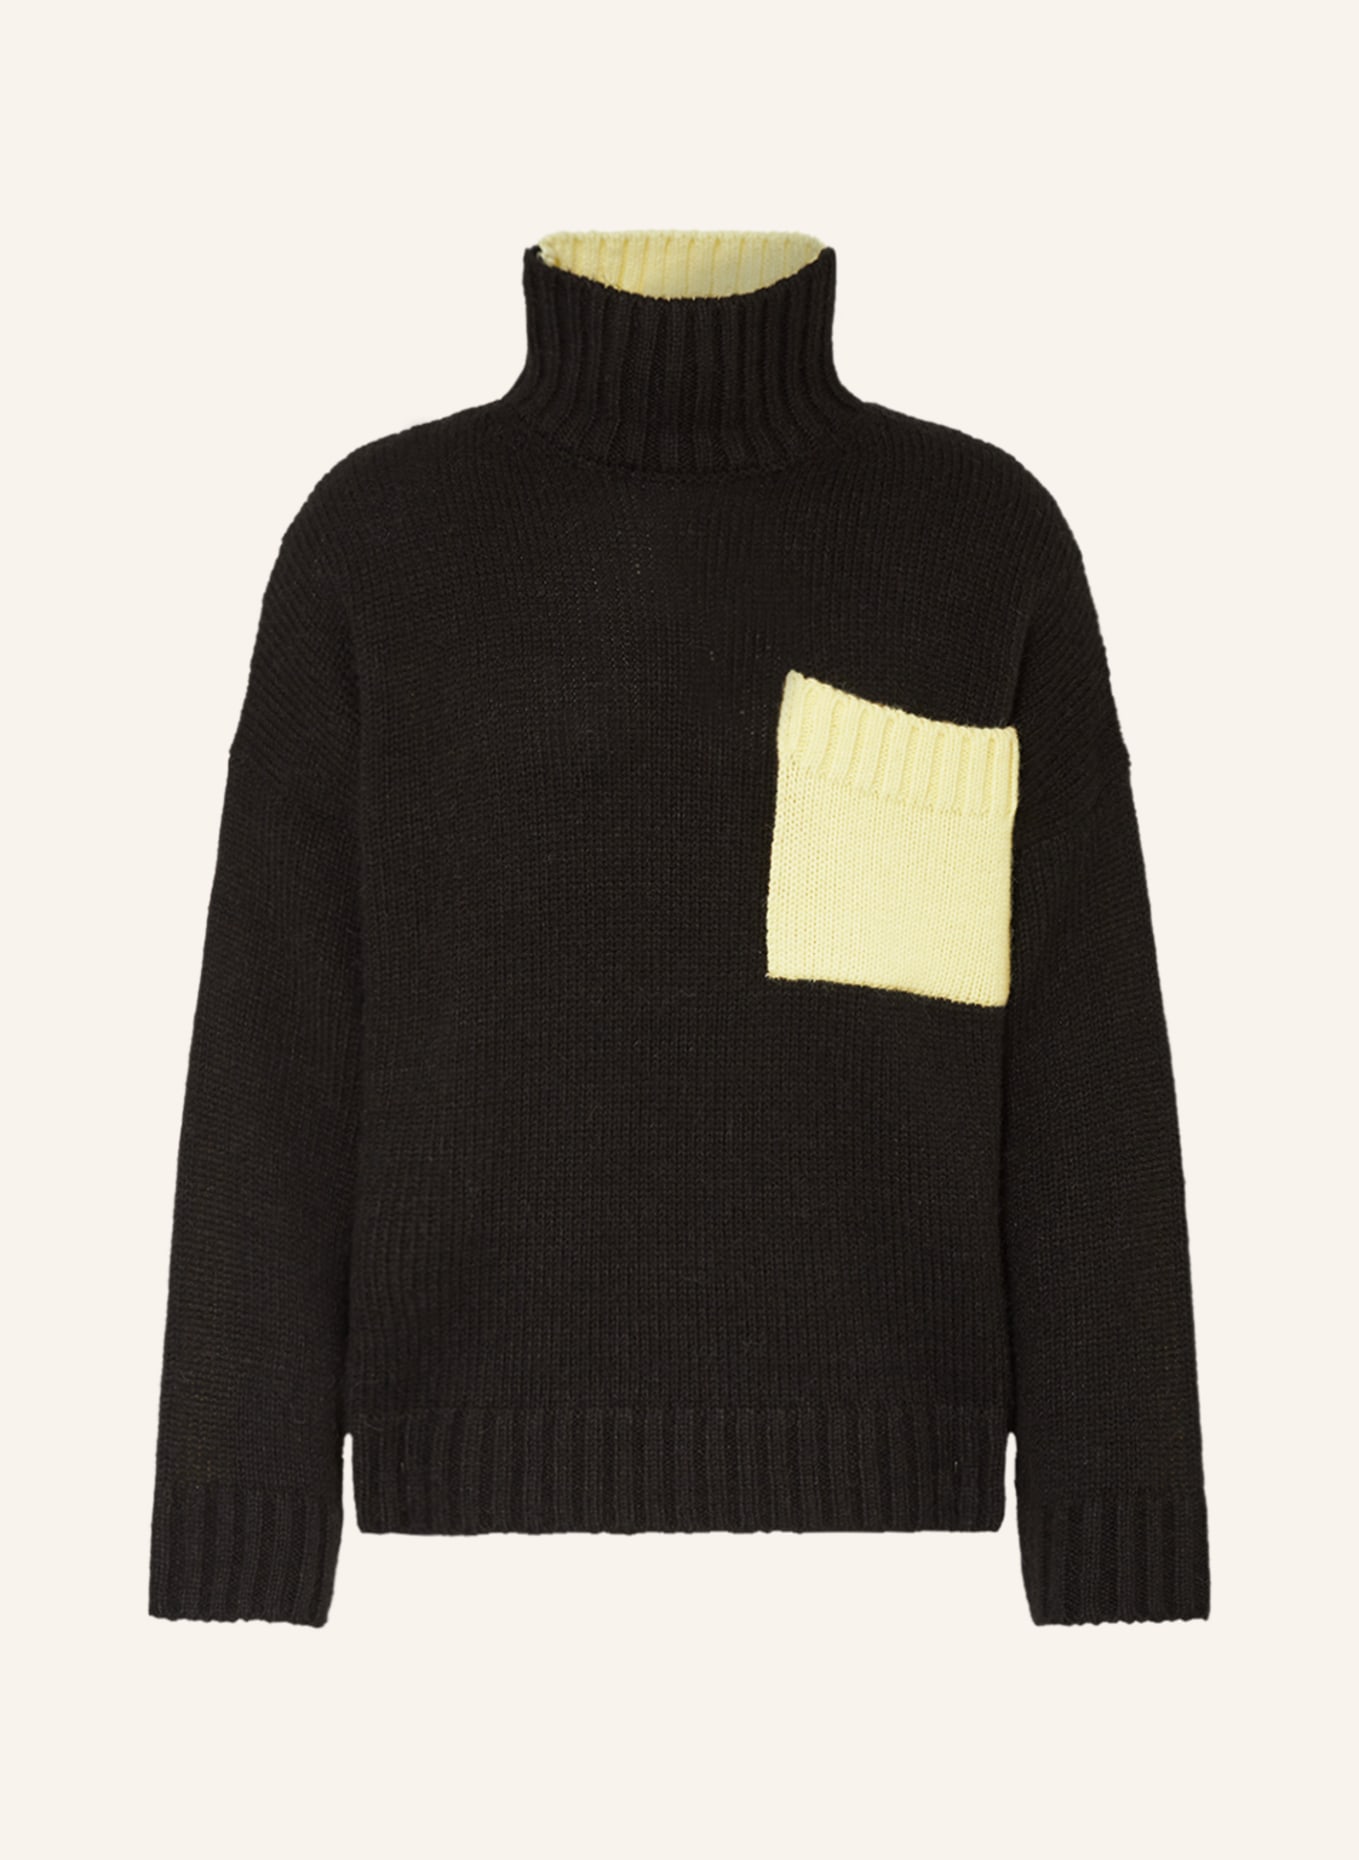 JW ANDERSON Sweater with alpaca, Color: BLACK/ LIGHT YELLOW (Image 1)